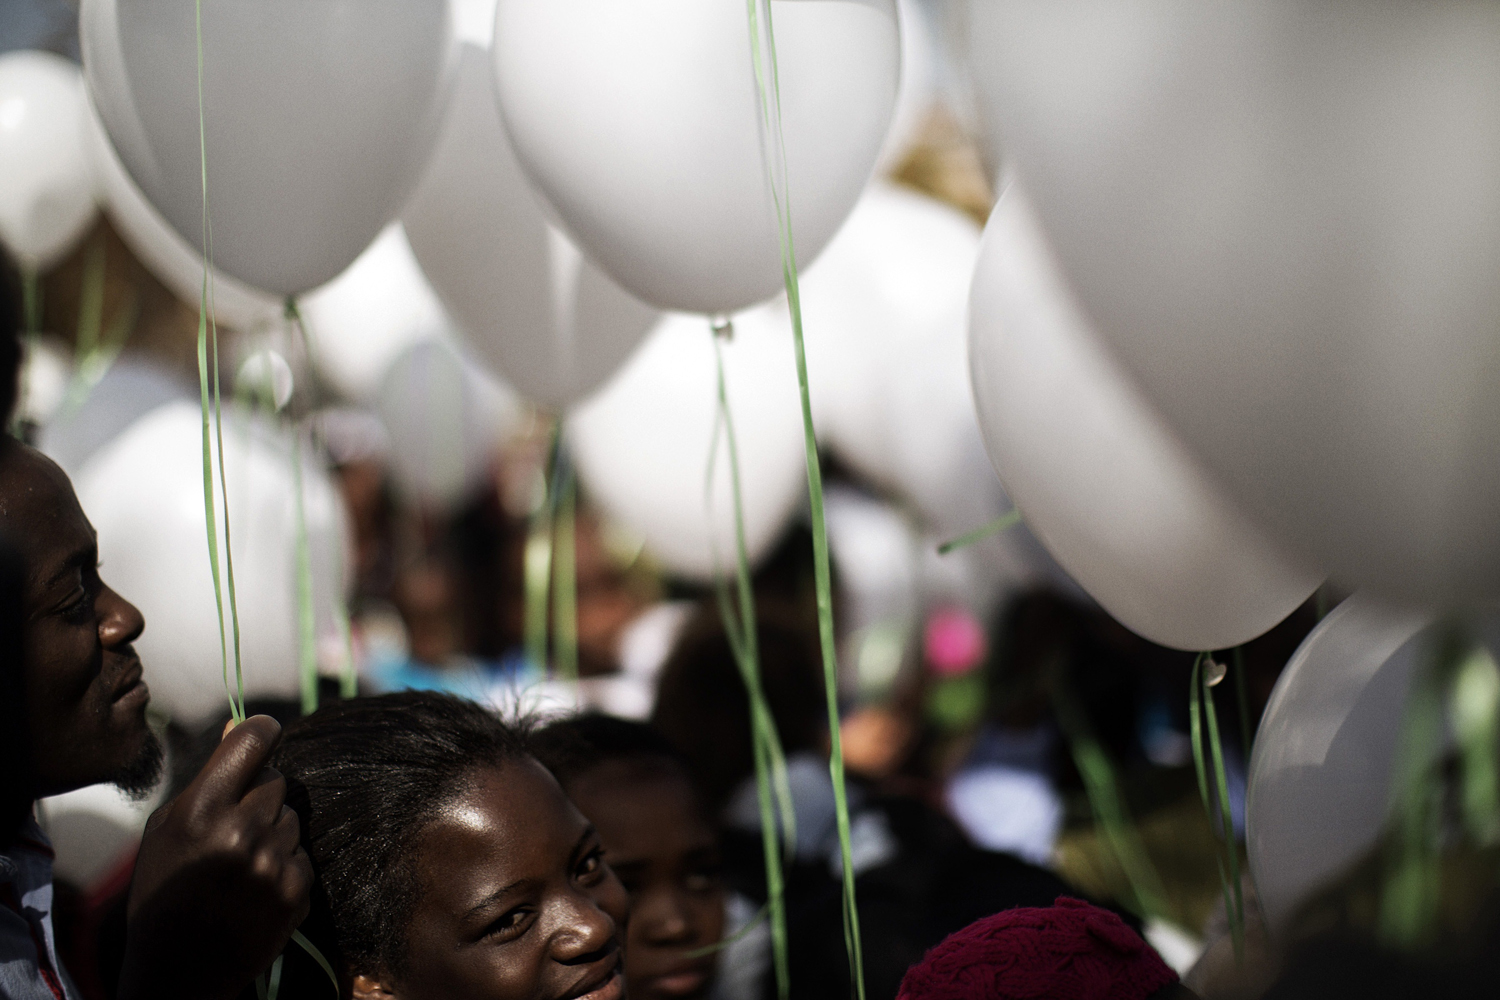 June 27, 2013. Well wishers hold 95 white balloons, one for each year of age, in honor of Nelson Mandela outside the Medi Clinic Heart Hospital in Pretoria.